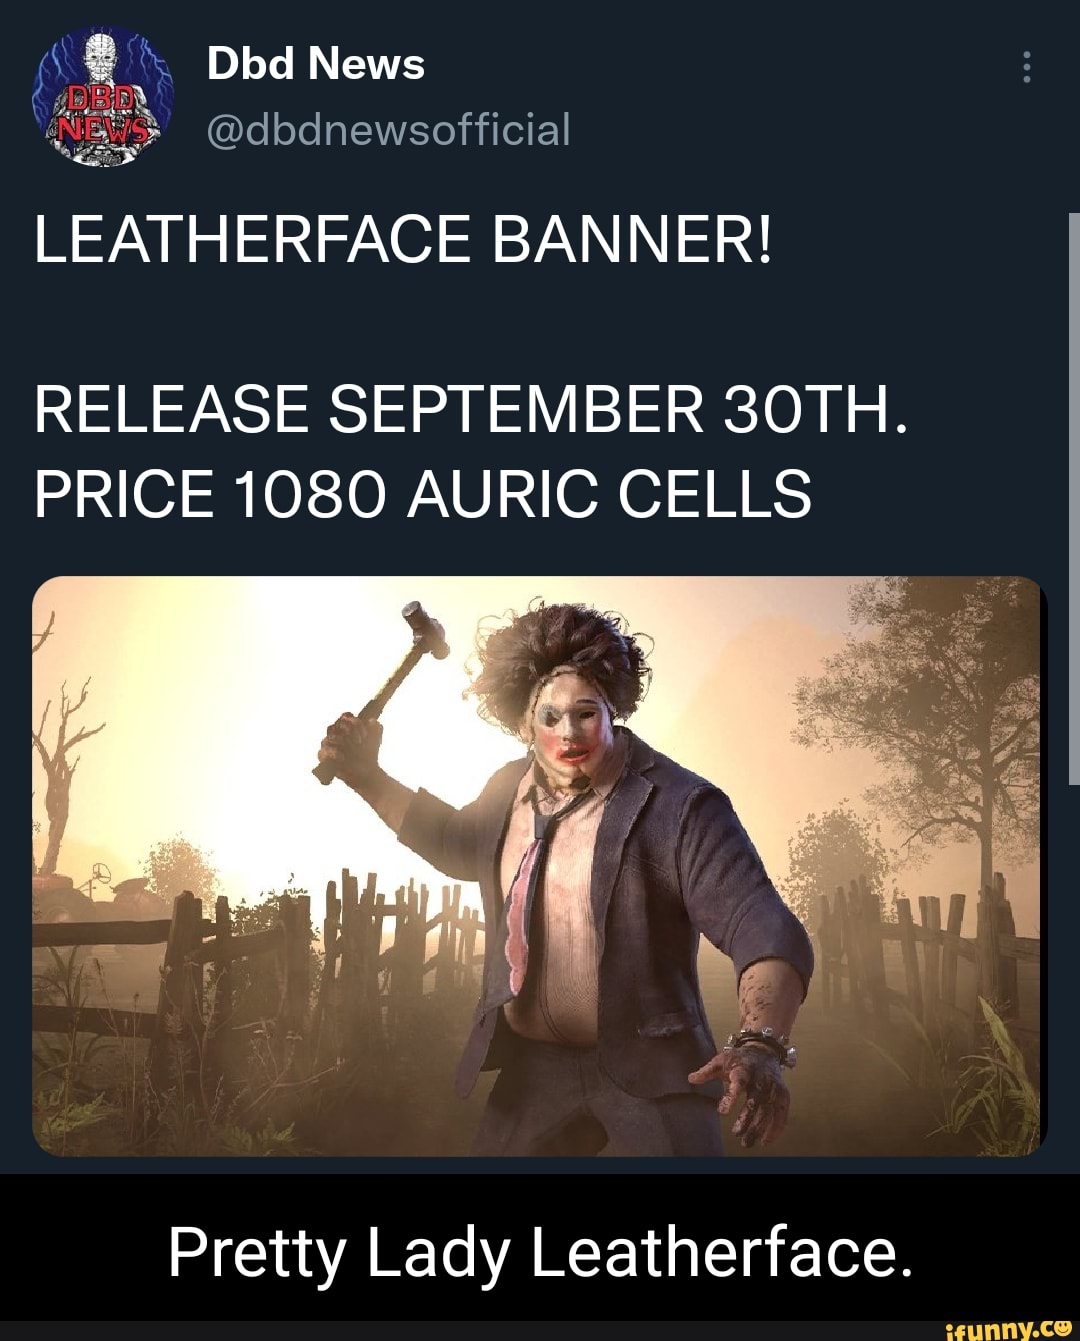 Dbd News Leatherface Banner Release September 30th Price 1080 Auric Cells Pretty Lady Leatherface